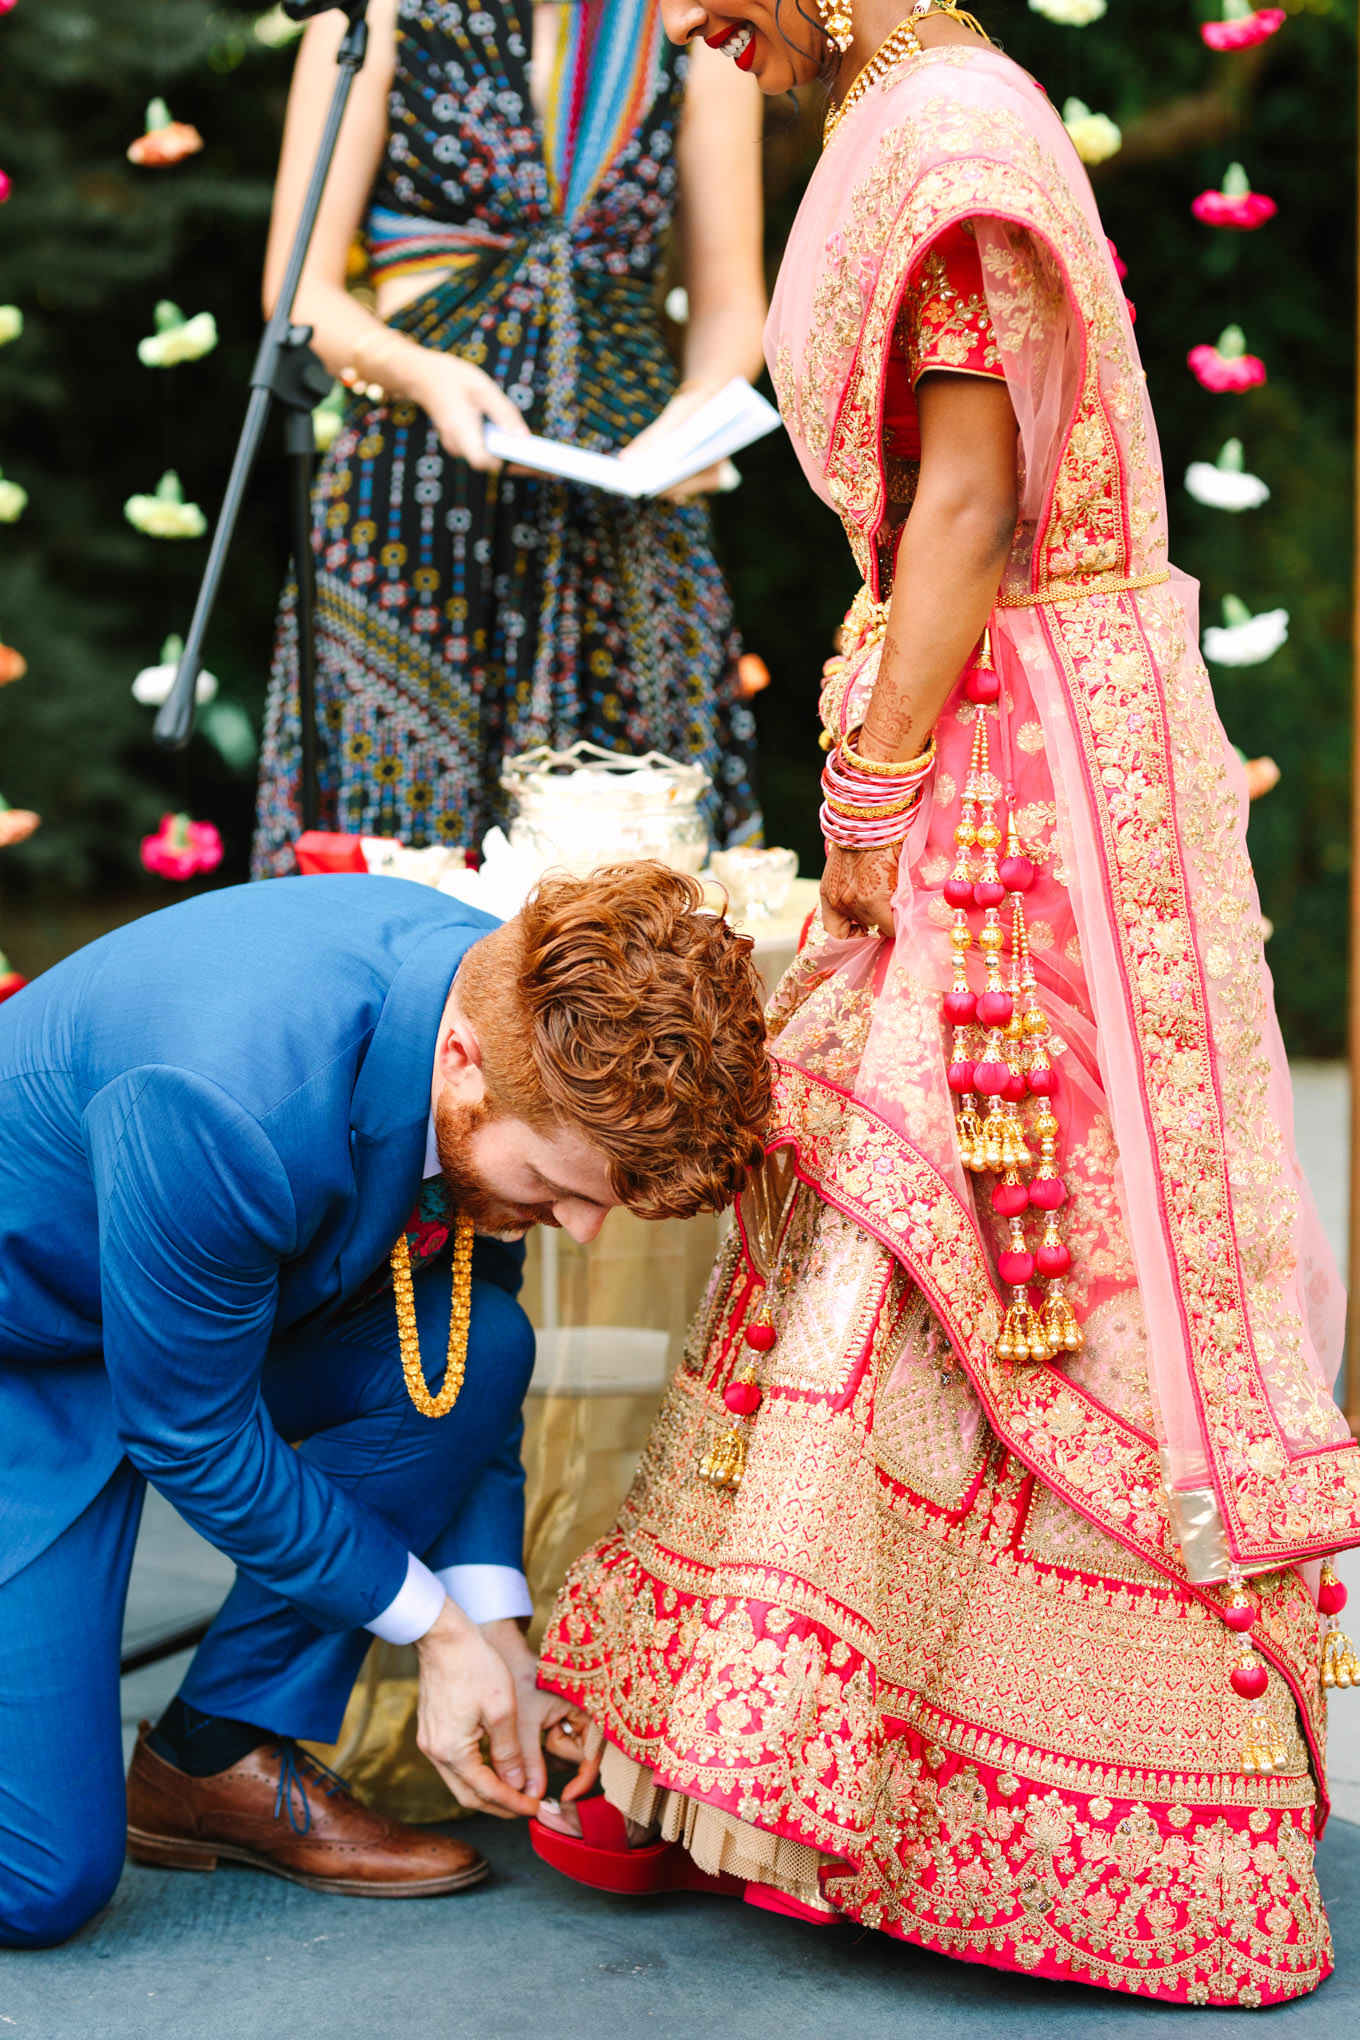 Groom placing toe ring on bride. Two Disney artists create a unique and colorful Indian Fusion wedding at The Fig House Los Angeles, featured on Green Wedding Shoes. | Colorful and elevated wedding inspiration for fun-loving couples in Southern California | #indianwedding #indianfusionwedding #thefighouse #losangeleswedding   Source: Mary Costa Photography | Los Angeles